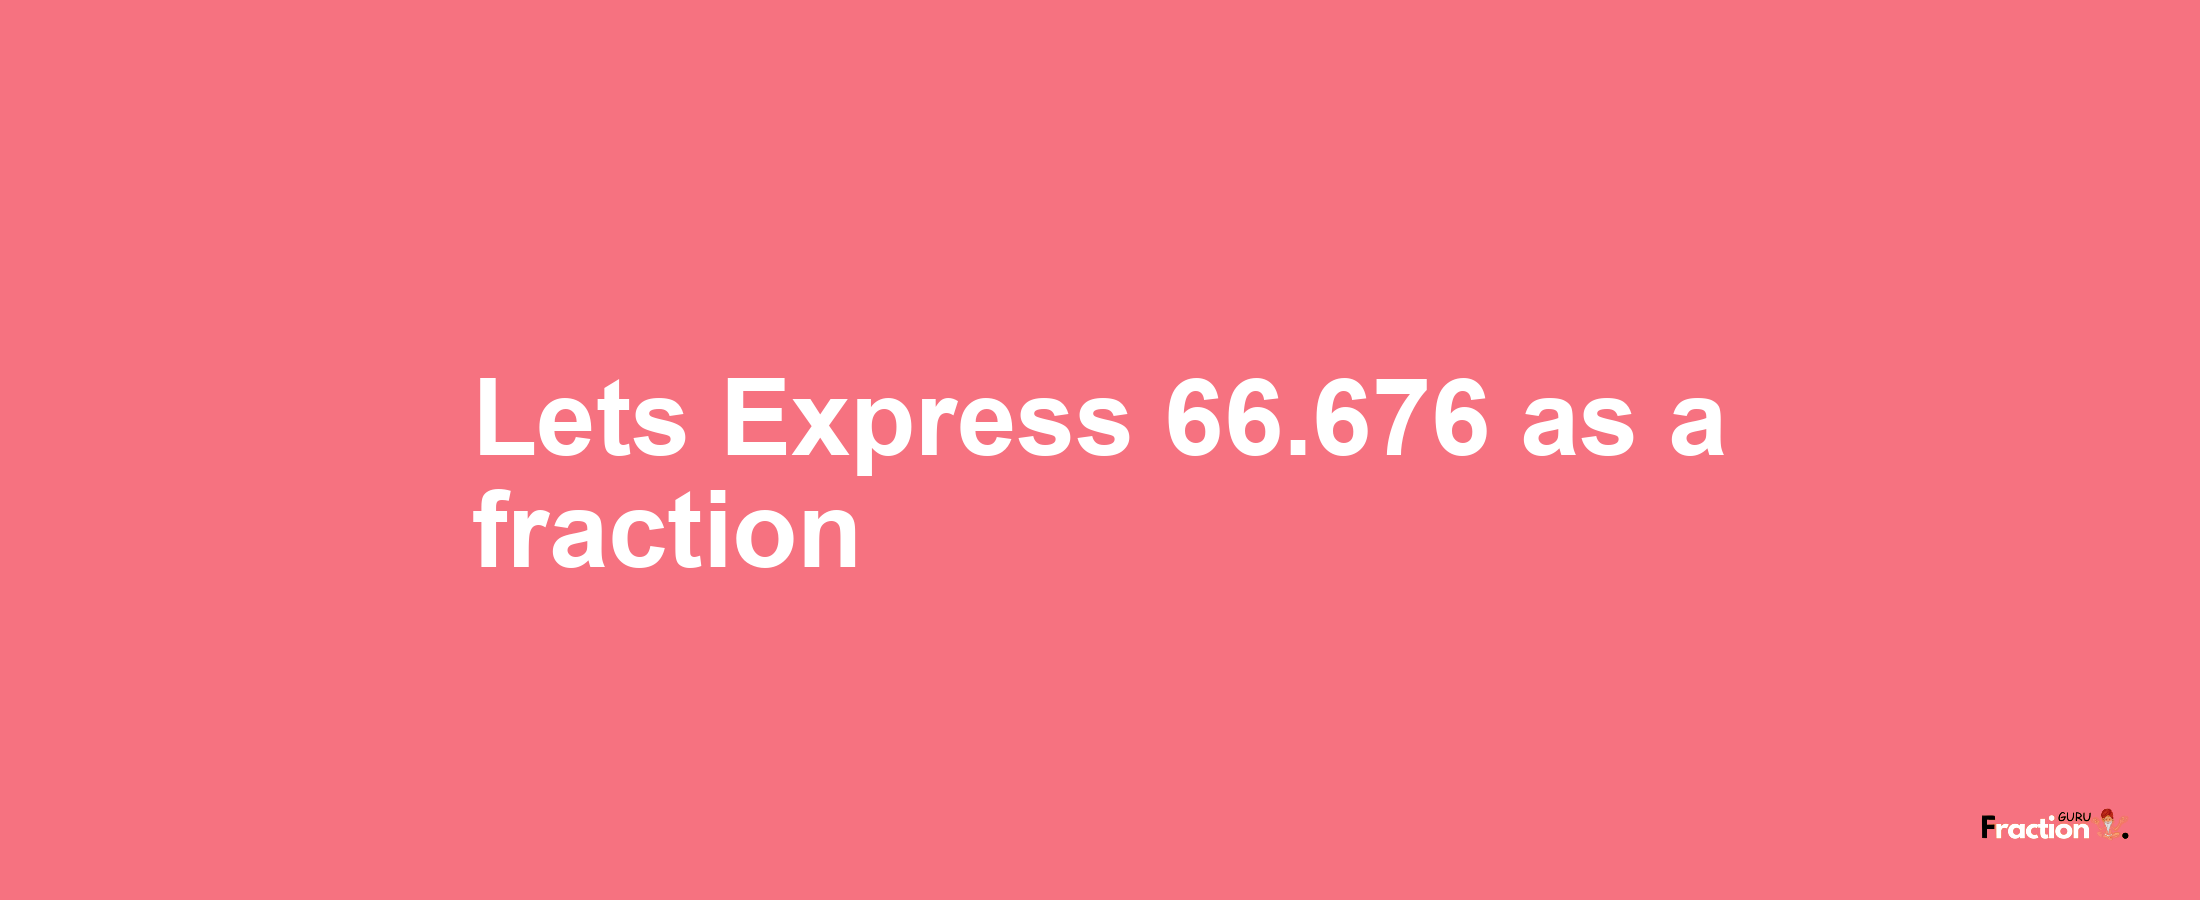 Lets Express 66.676 as afraction